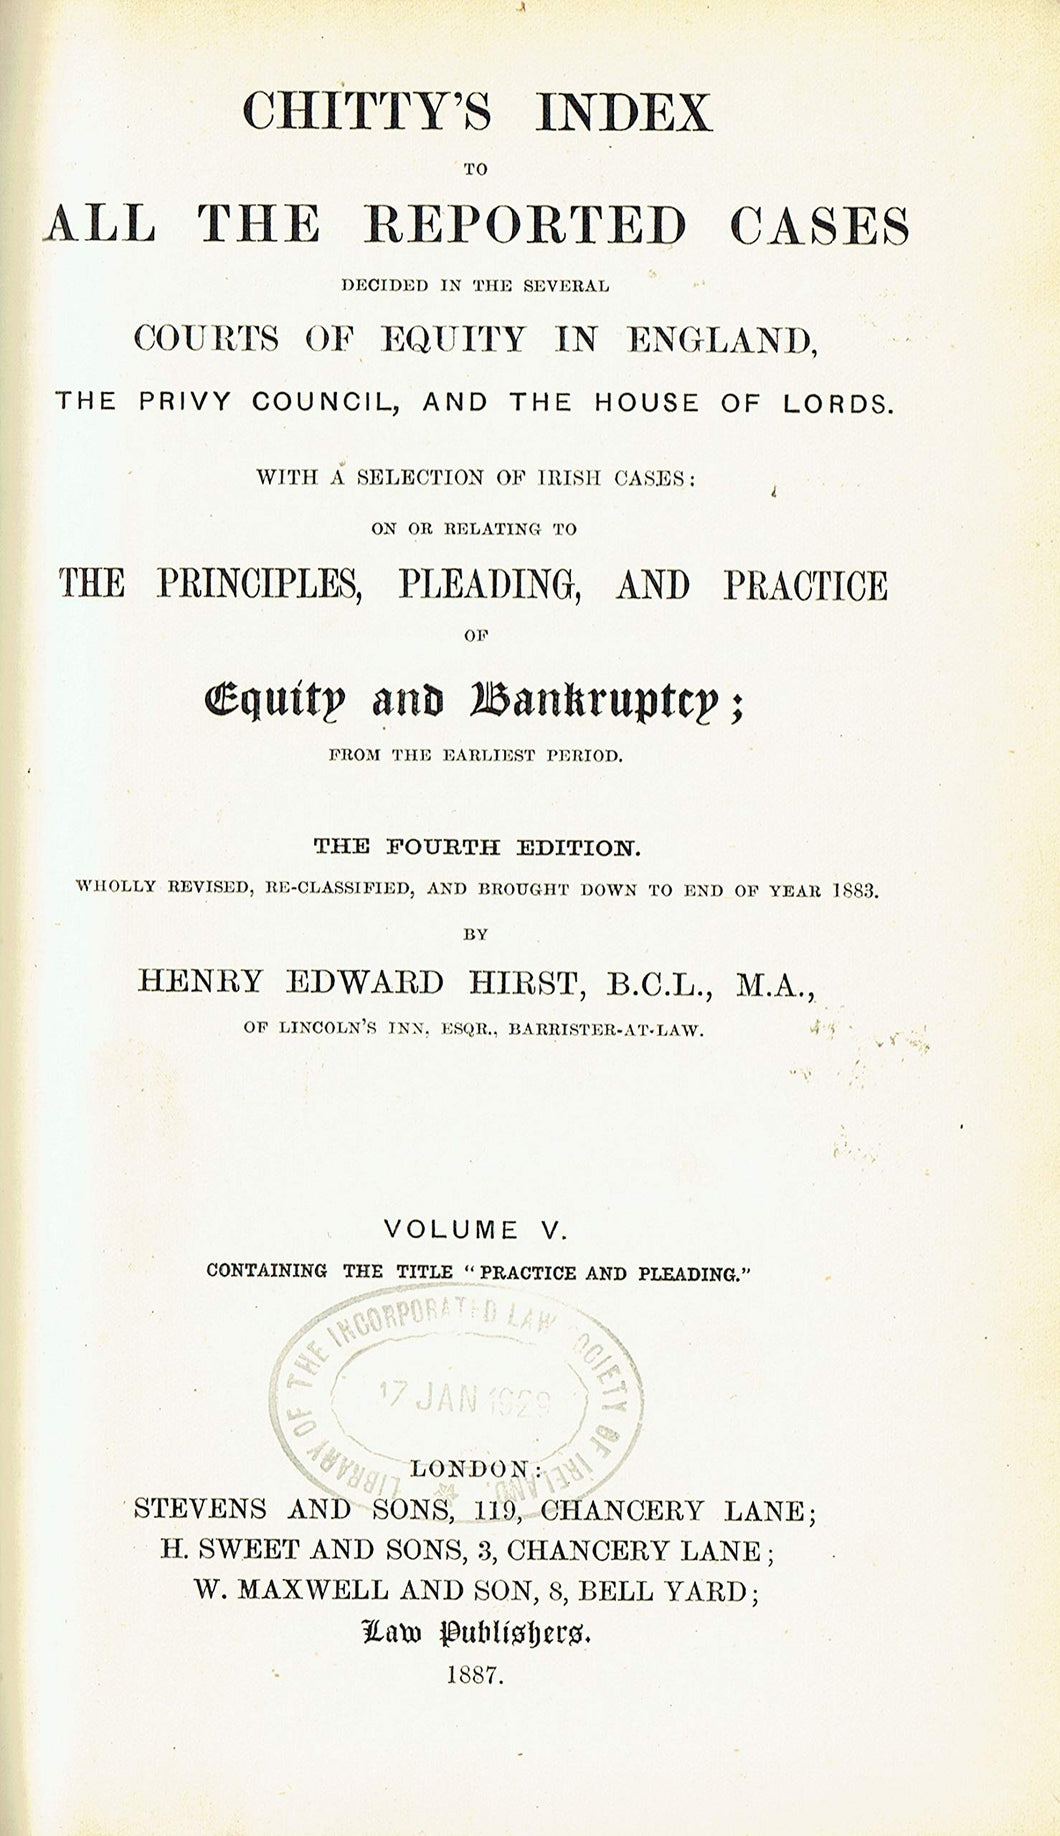 Chitty's Equity Index, Fourth Edition Volume V (Volume 5) - Chitty's Index to All the Reported Cases Decided in the Several Courts of Equity in England, the Privy Council, and the House of Lords